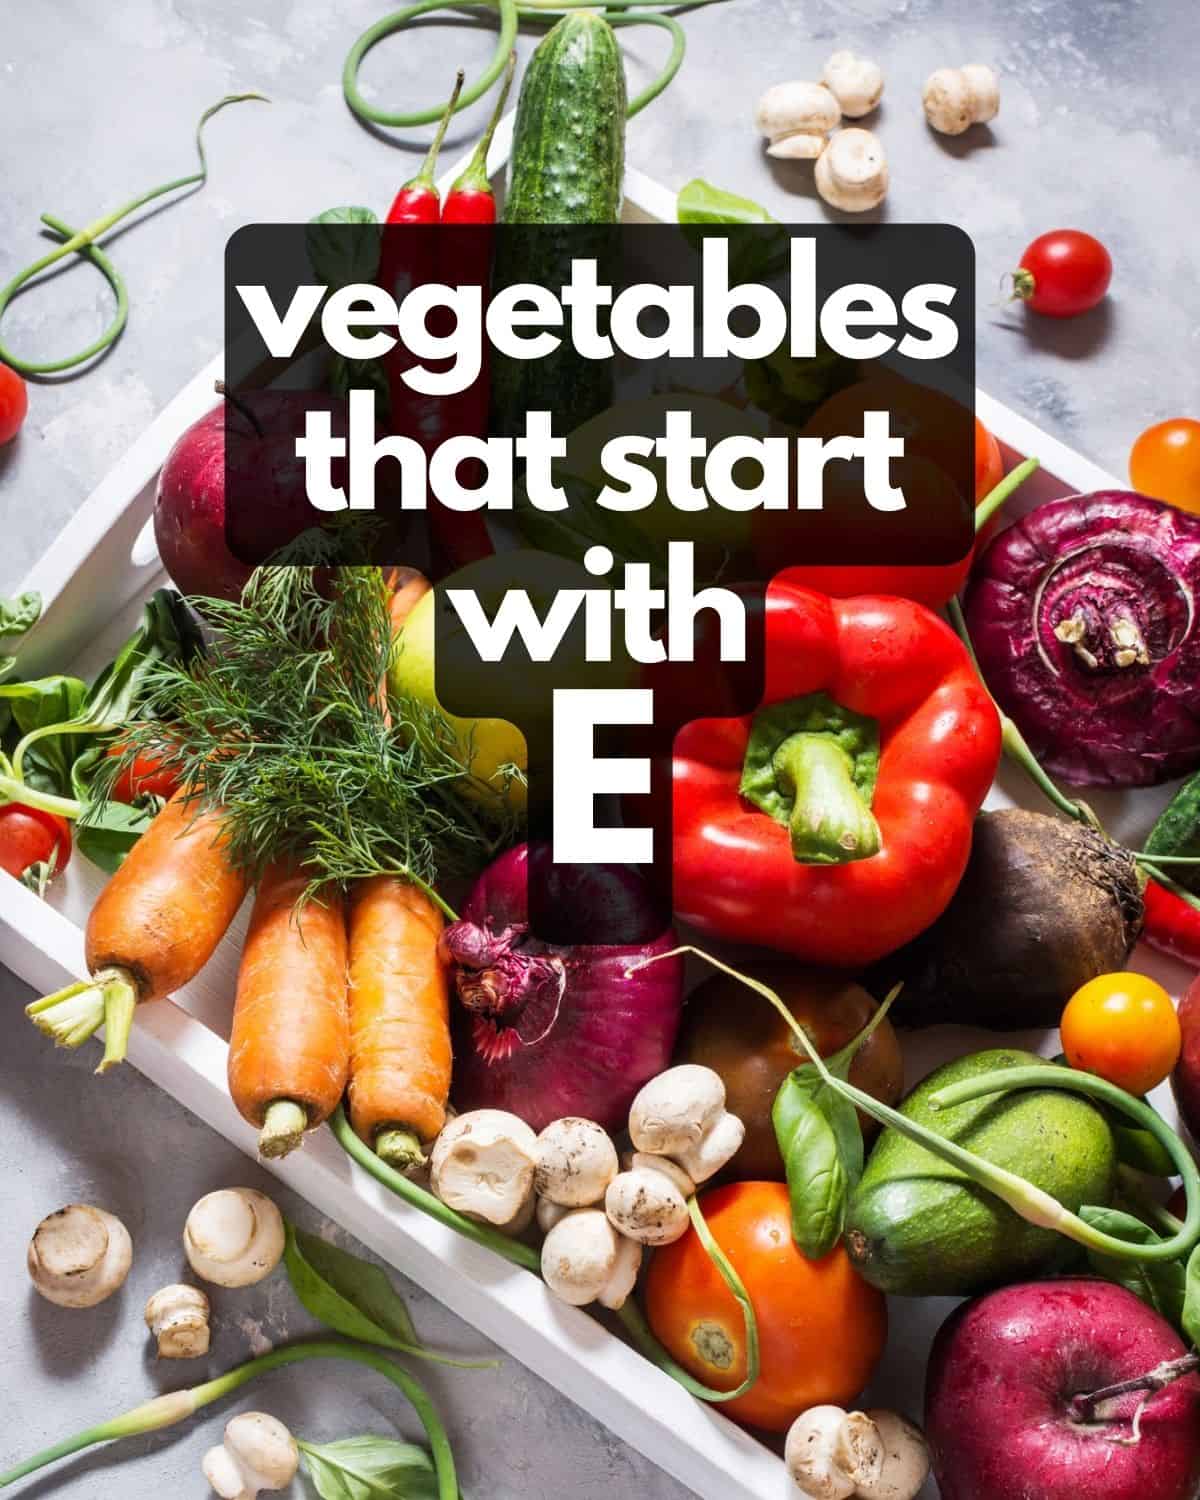 Table of vegetables, plus text: Vegetables that start with E.